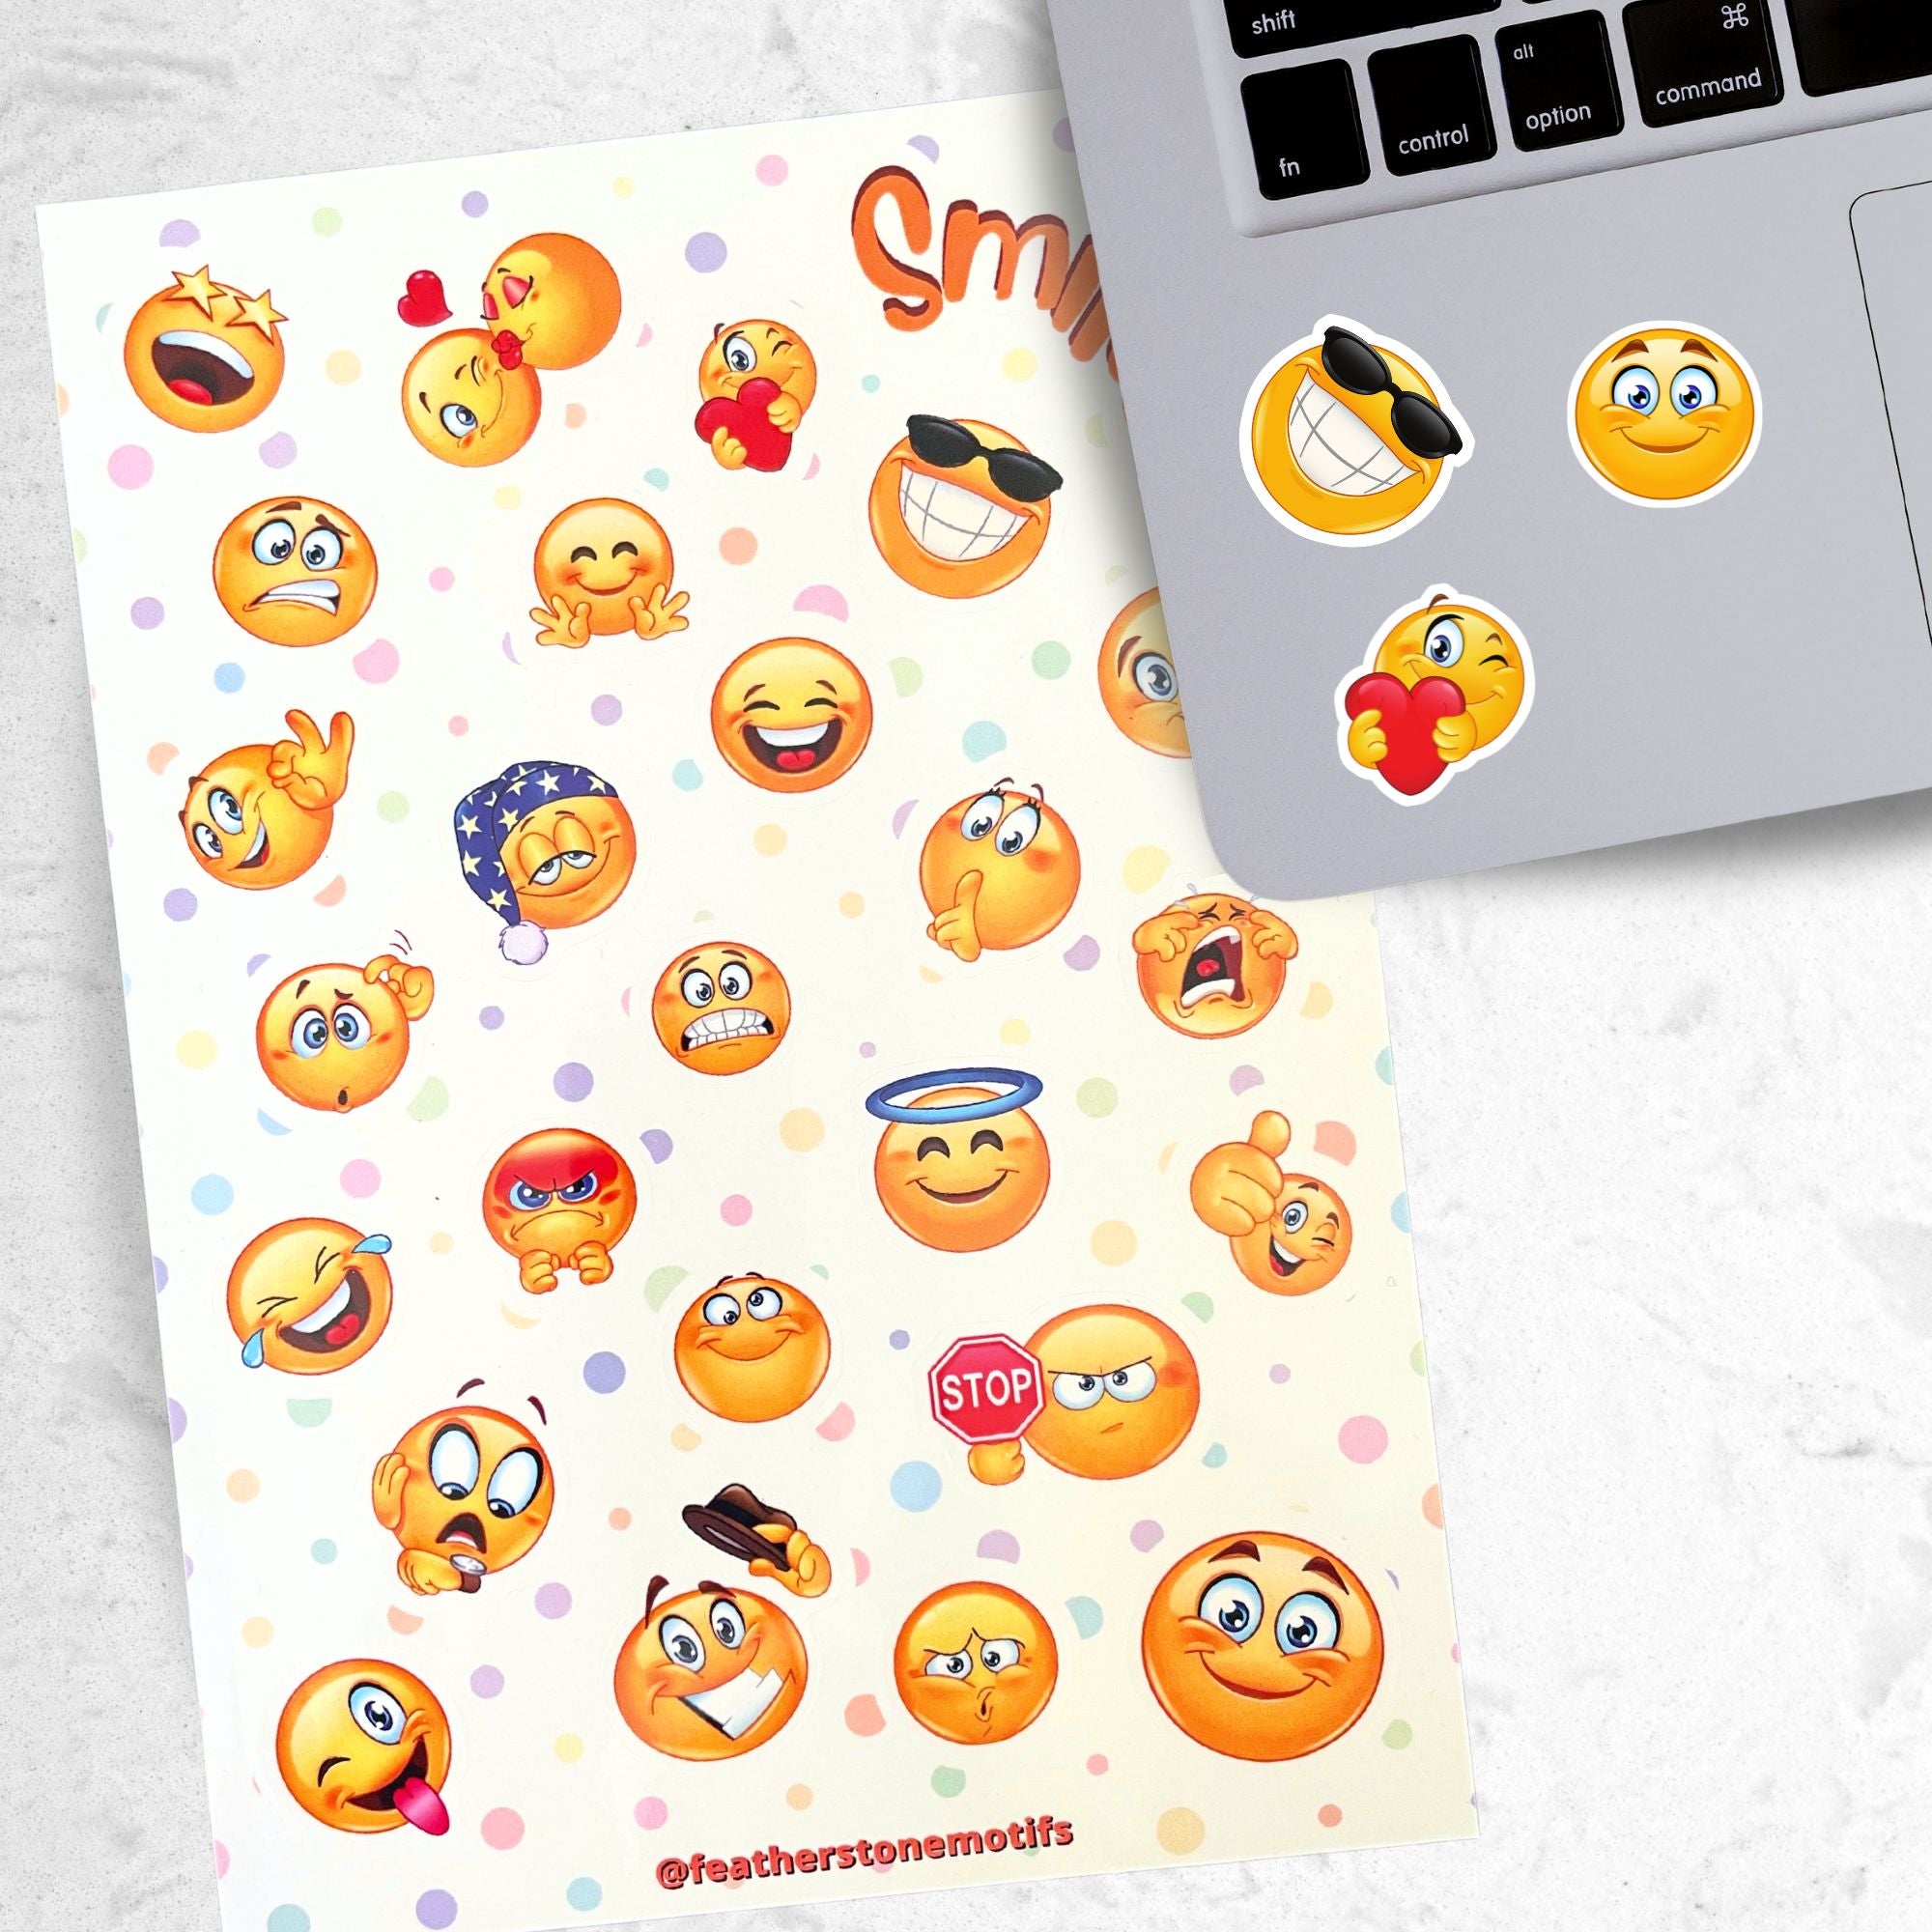 This sticker sheet features all your favorite smiley emojis! It's enough to make anyone smile! This image shows the Smiley sticker sheet next to a laptop with stickers of a smiley face with sunglasses, a blue eyed smiley face, and a smiley face holding a heart applied below the keyboard.